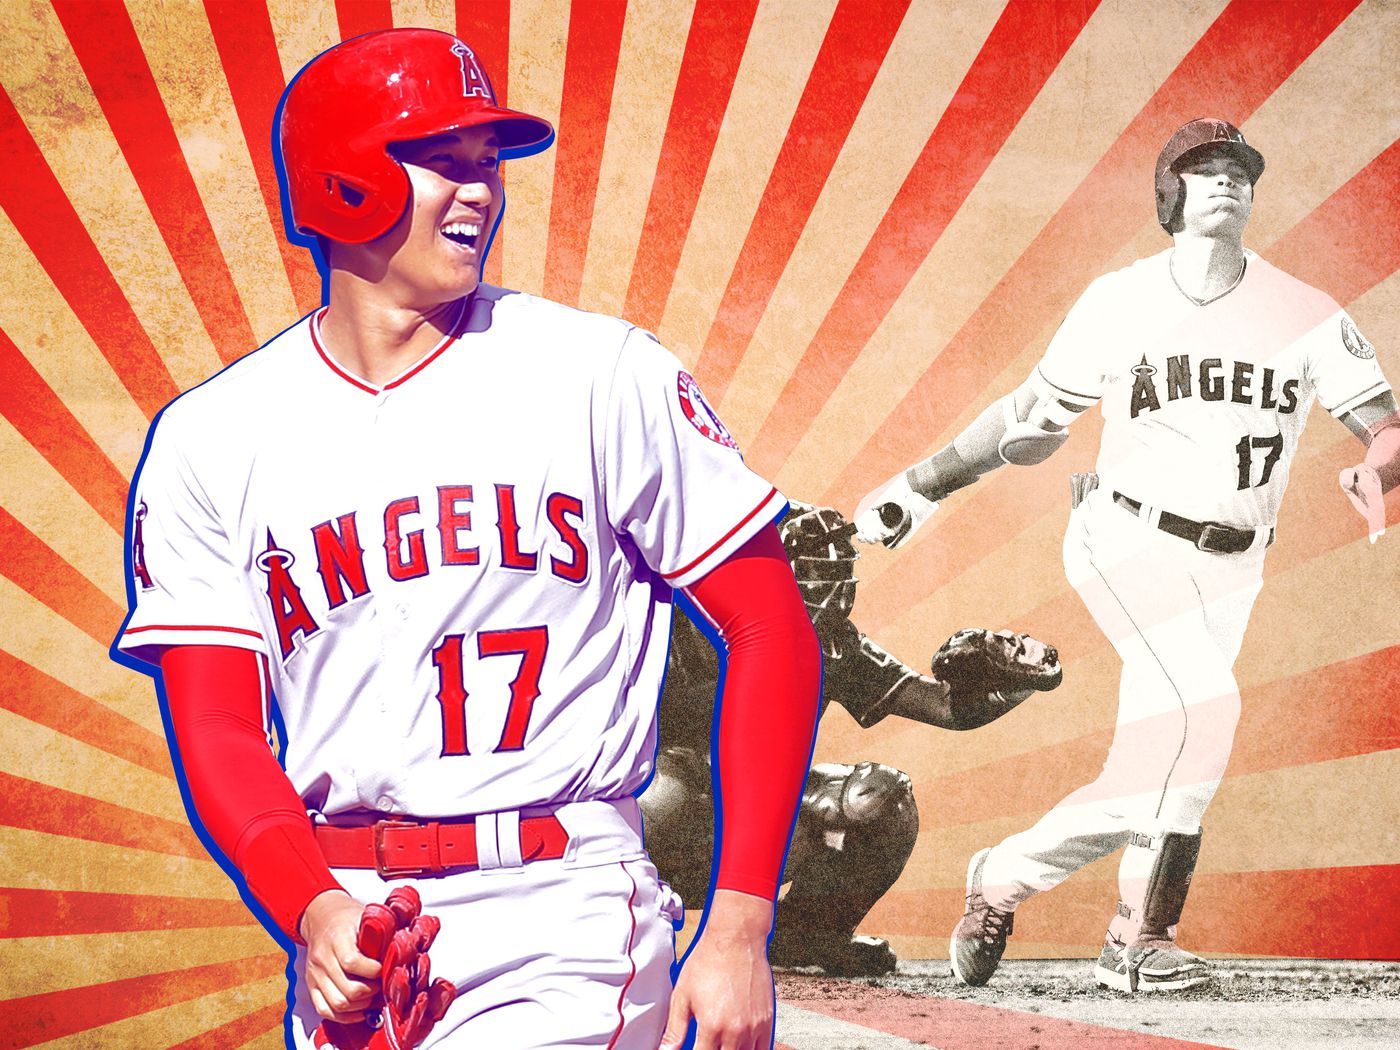 Hey! I just wanted to share the Wallpaper I did for Ohtani. :  r/angelsbaseball